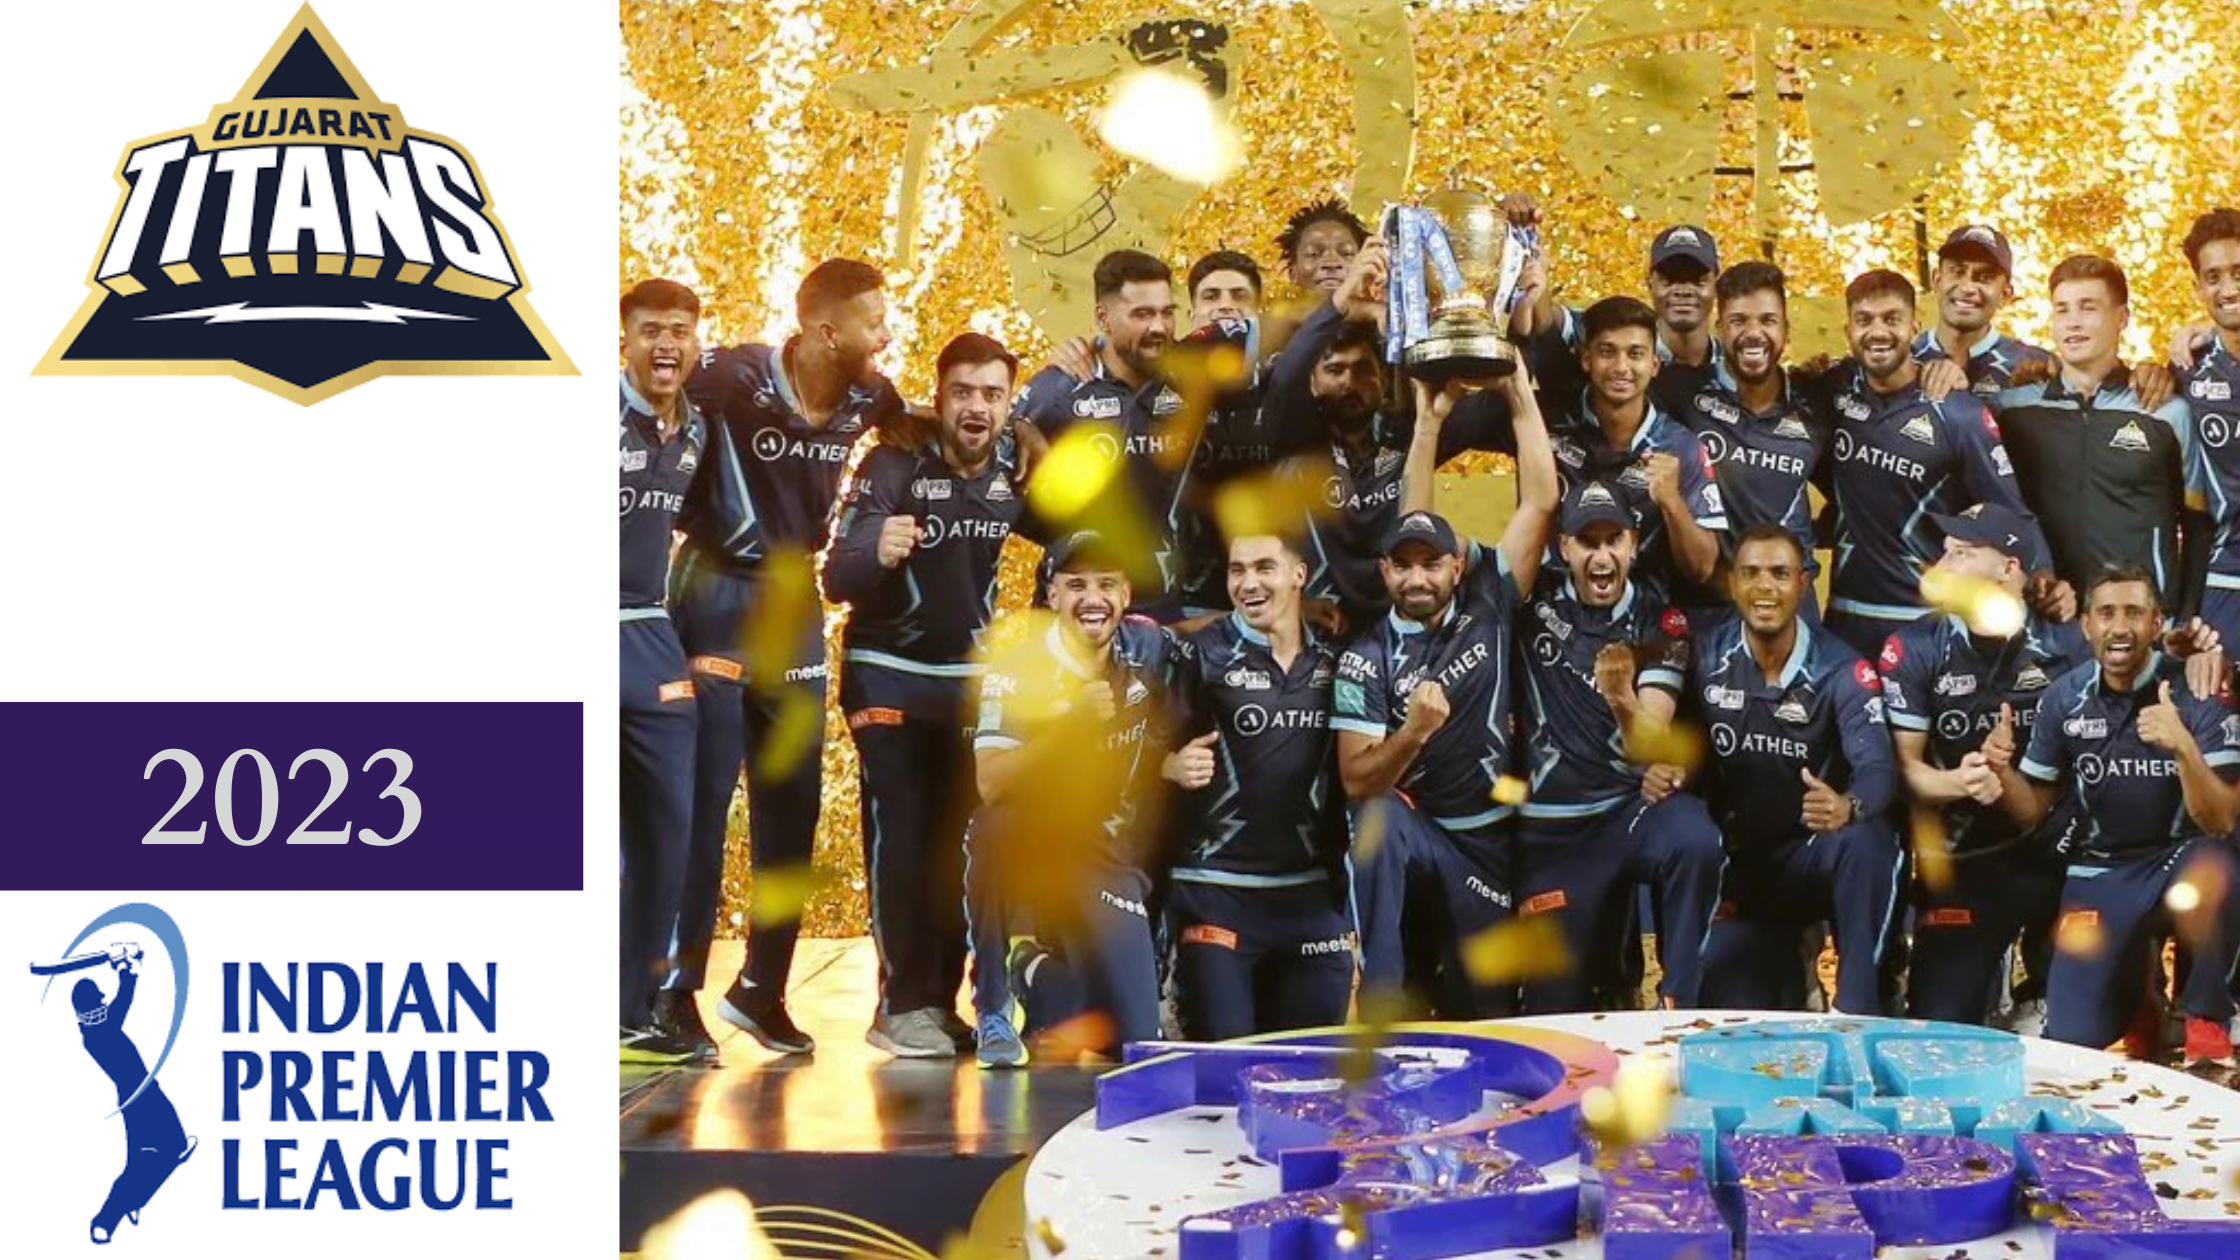 2023 TATA IPL T20 – Gujarat Titans Players, franchise, owner, captain, coach, logo, jersey, home ground, ipl victory, first match, home ground, merchandise, game plan